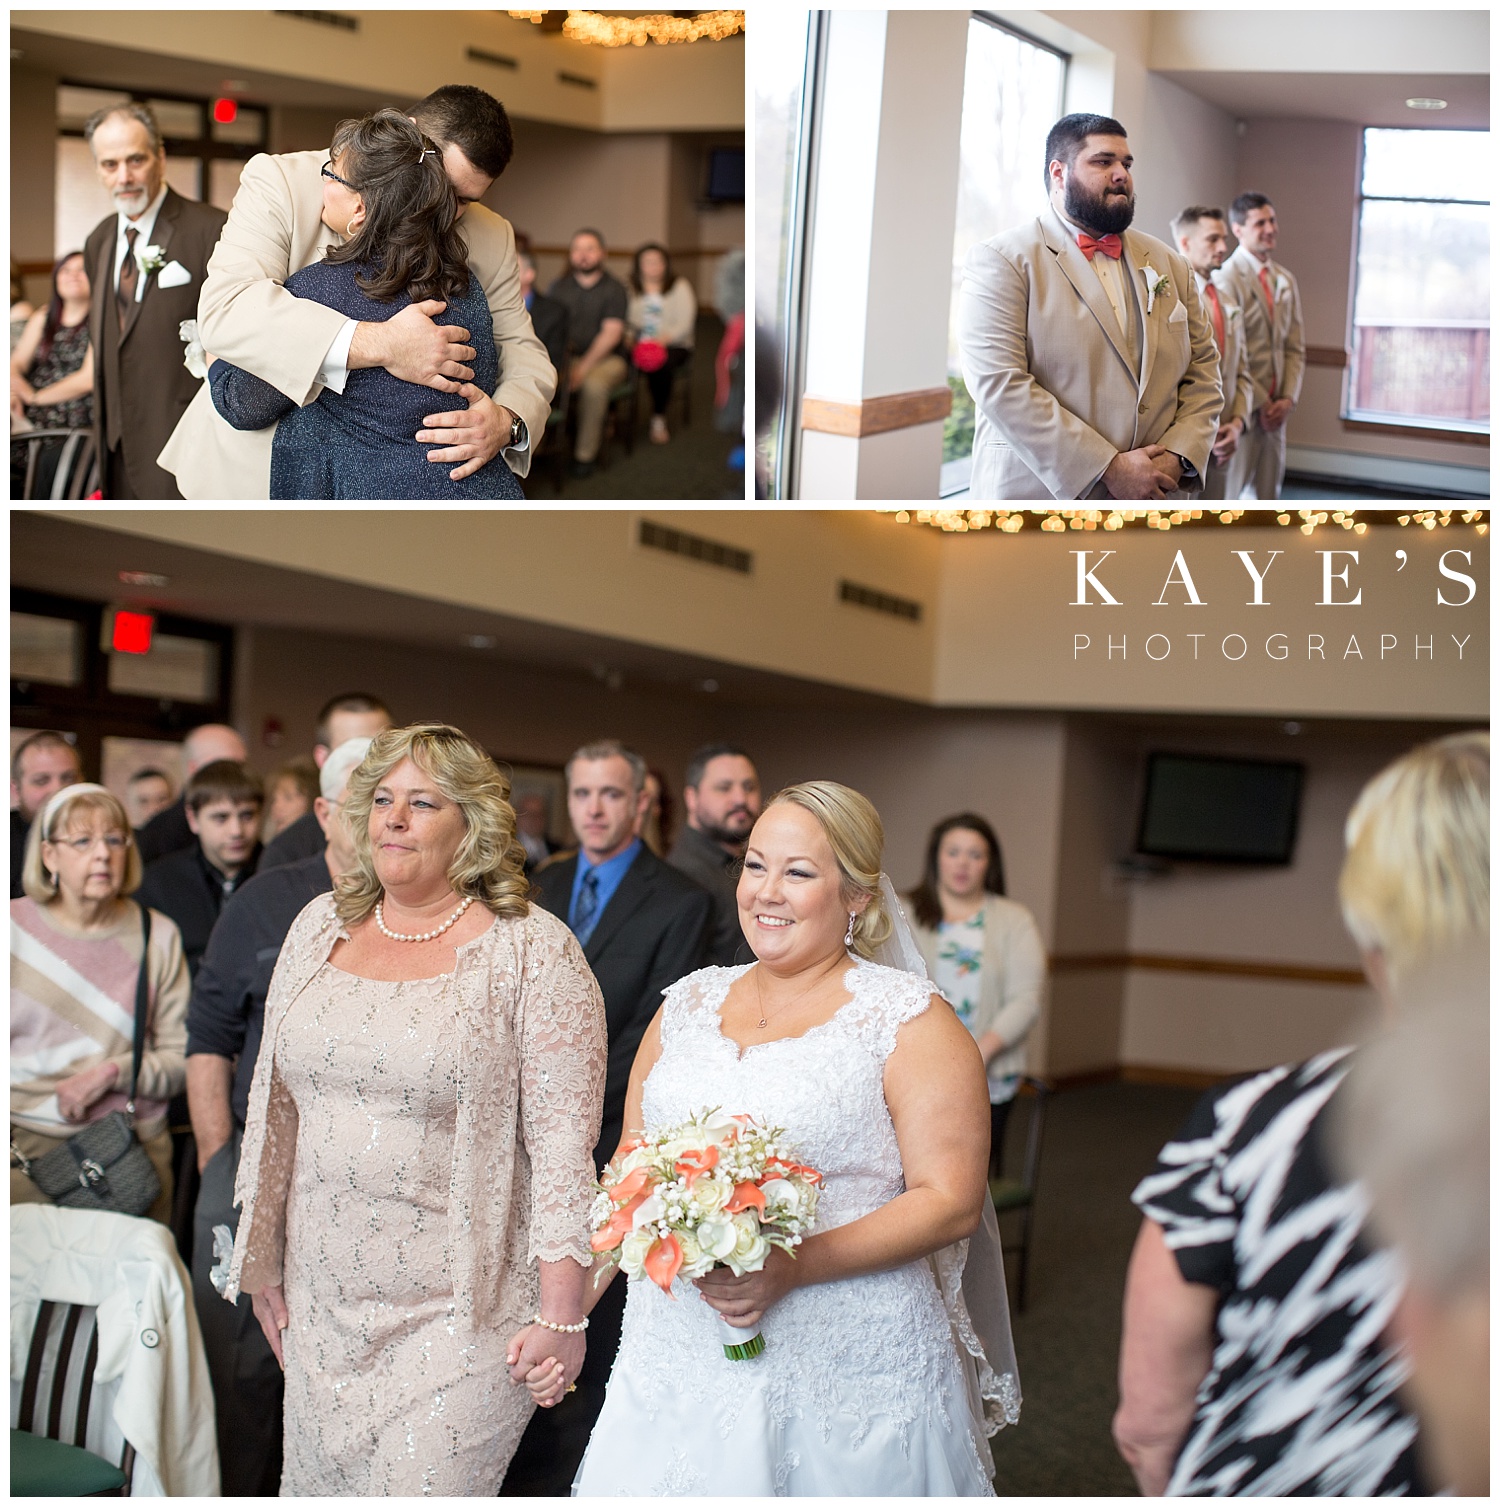 indoor ceremony location in lapeer michigan with great natural light